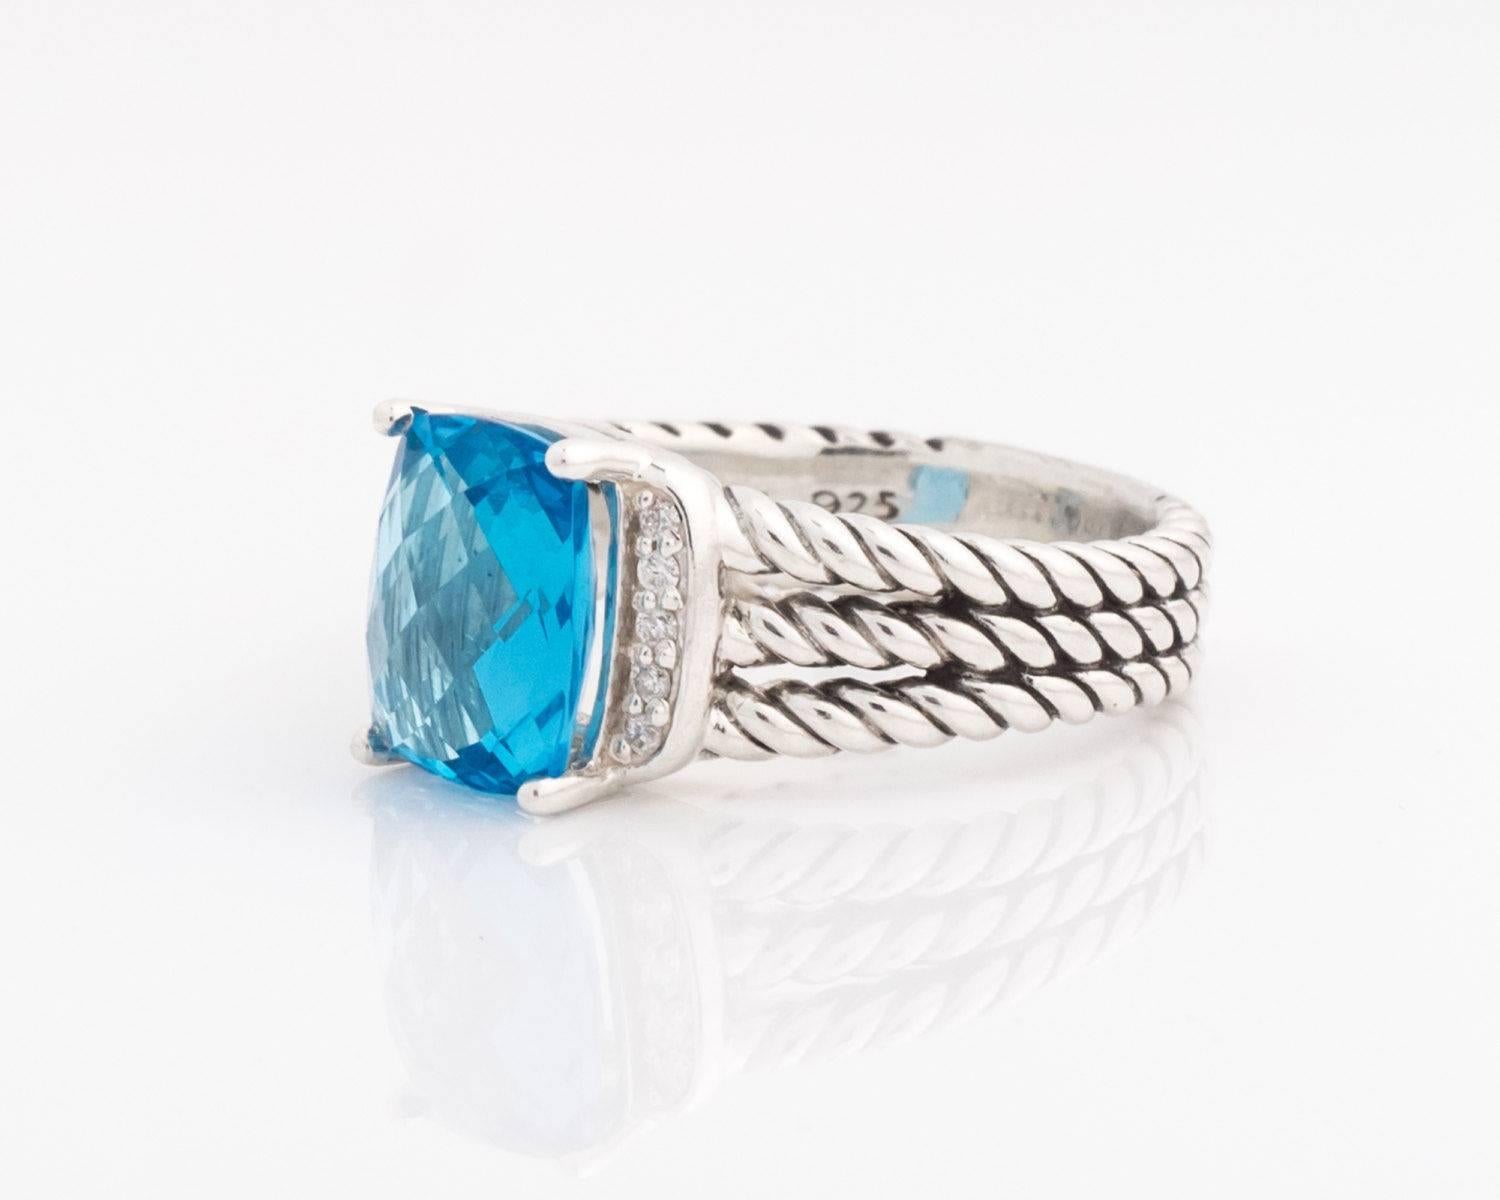 David Yurman Petite Wheaton Ring with Blue Topaz, Diamonds, Sterling Silver 

Features a 10 x 8 millimeters Faceted Blue Topaz center stone flanked by one row of Pave Diamonds on each side. The medium blue Topaz is prong set in Sterling Silver. The